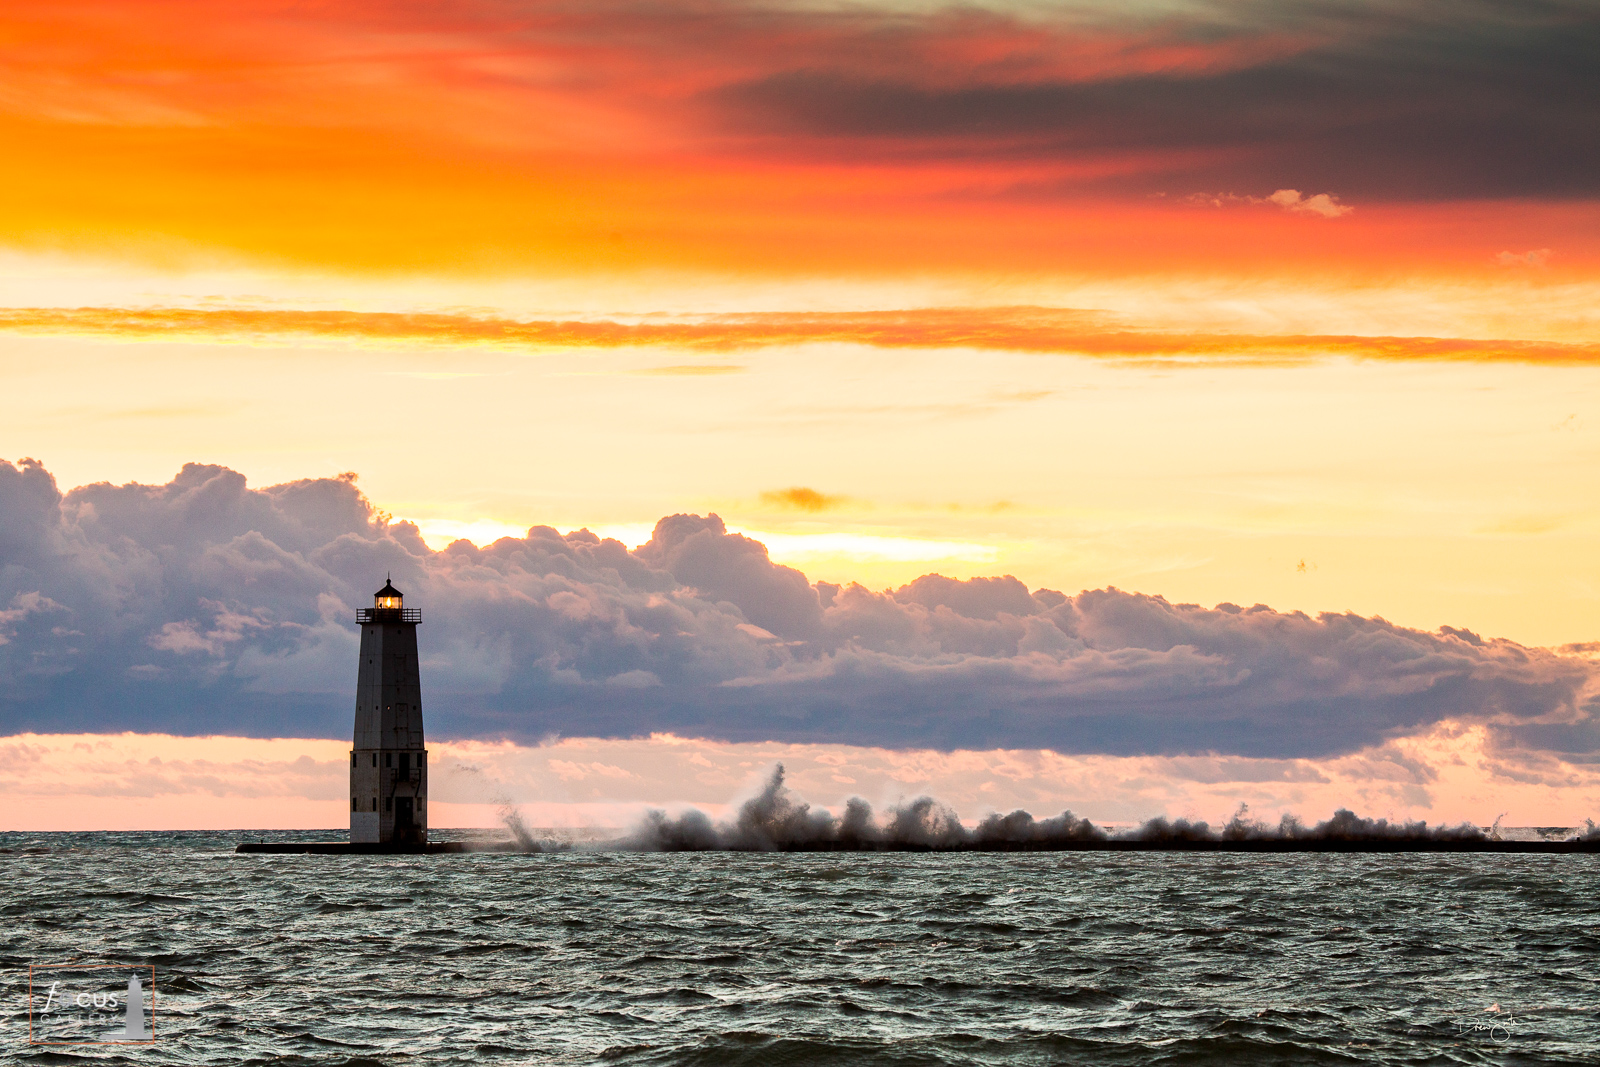 Large waves crash against the Frankfort North Breakwater Lighthouse during a colorful sunset.